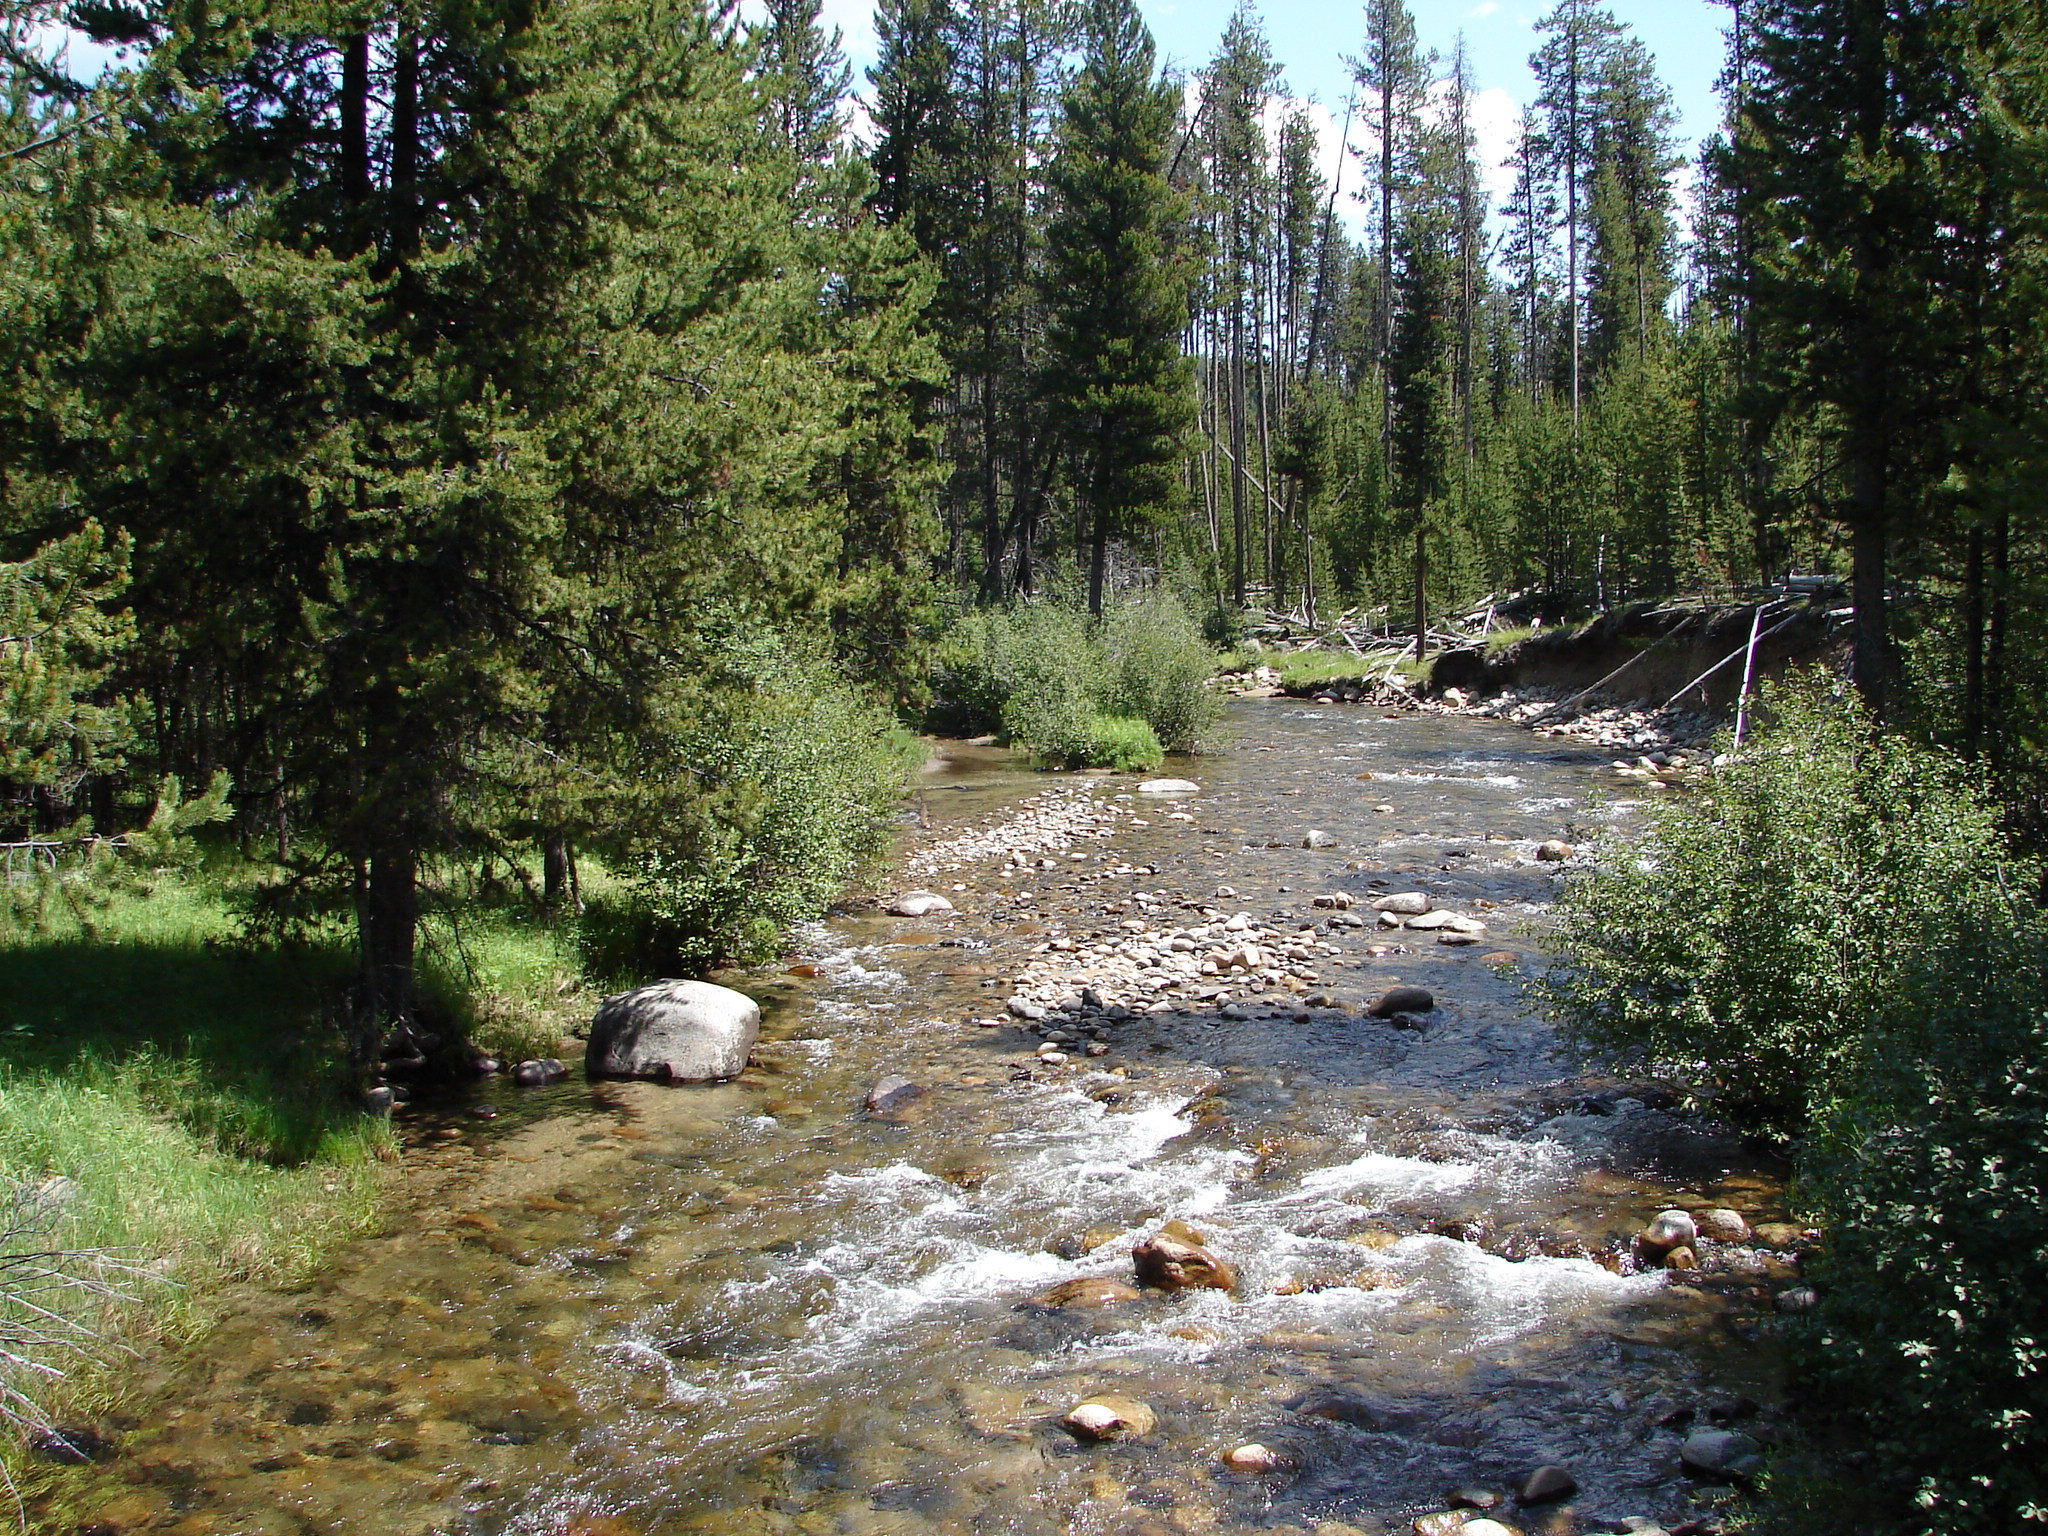 Wild and scenic North Fork John Day River flowing through a pine and fir tree forest